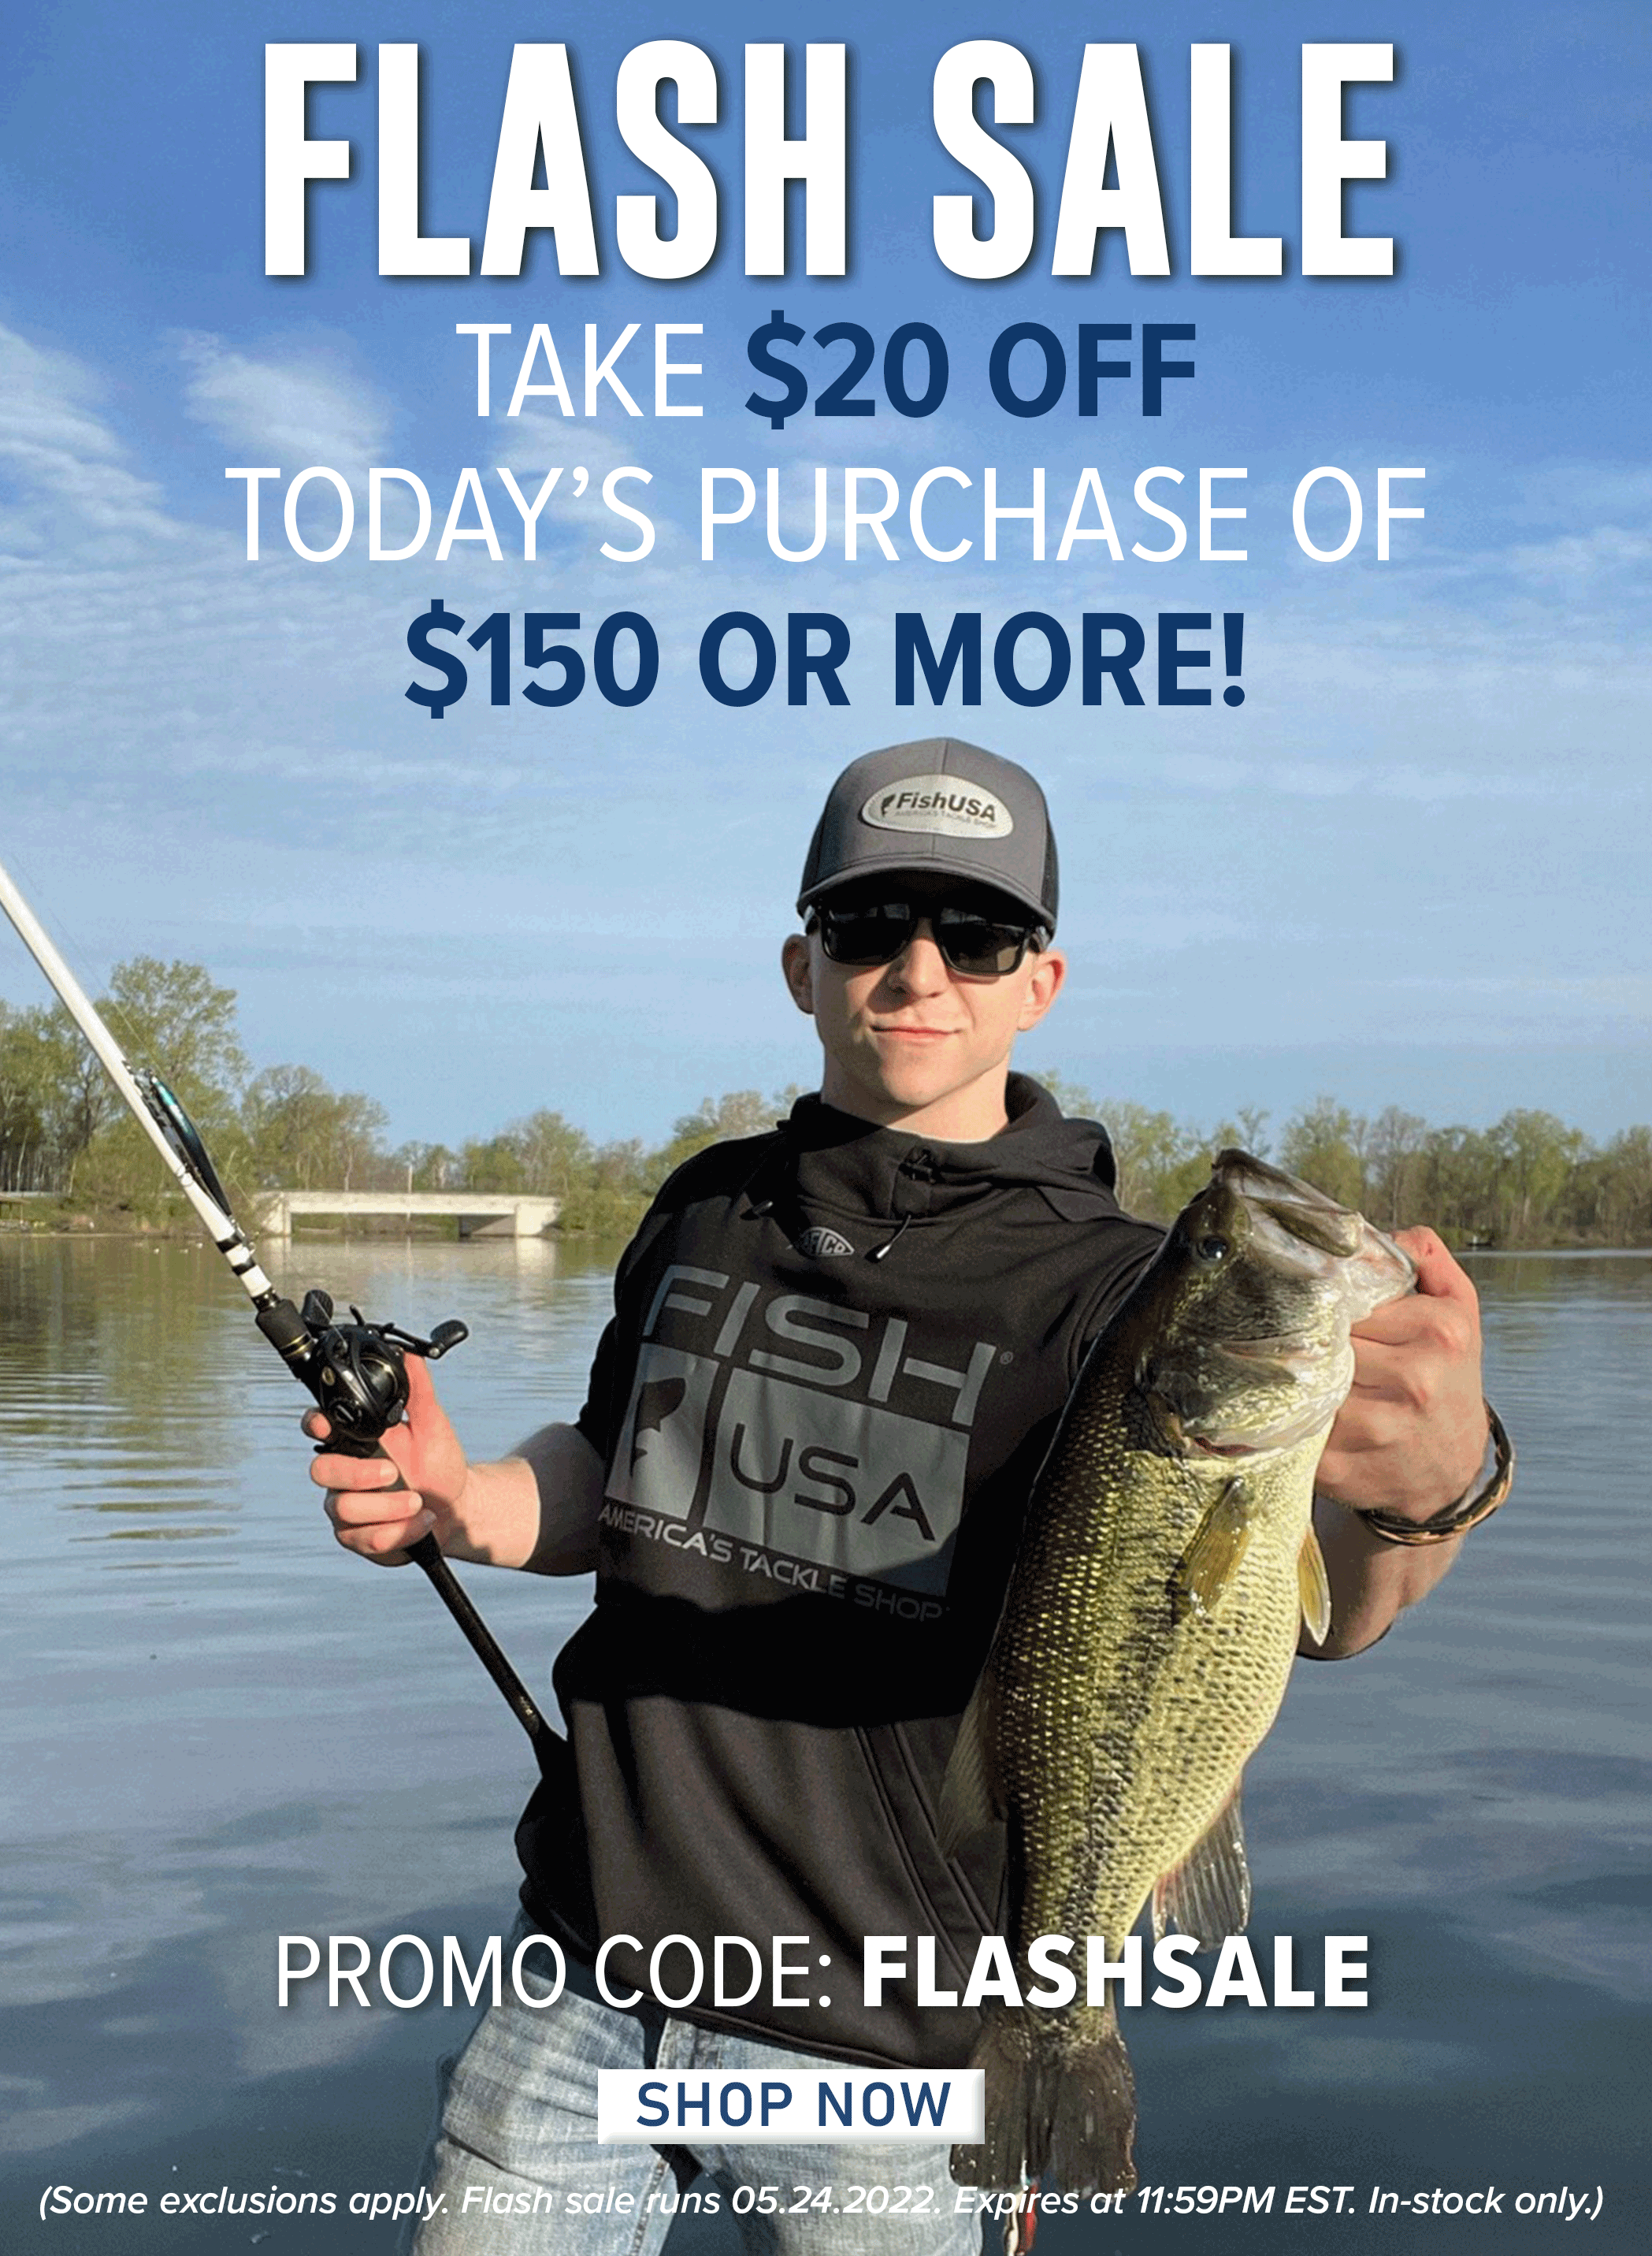 FishUSA.com: Hurry, This Flash Sale Is For Tonight Only!